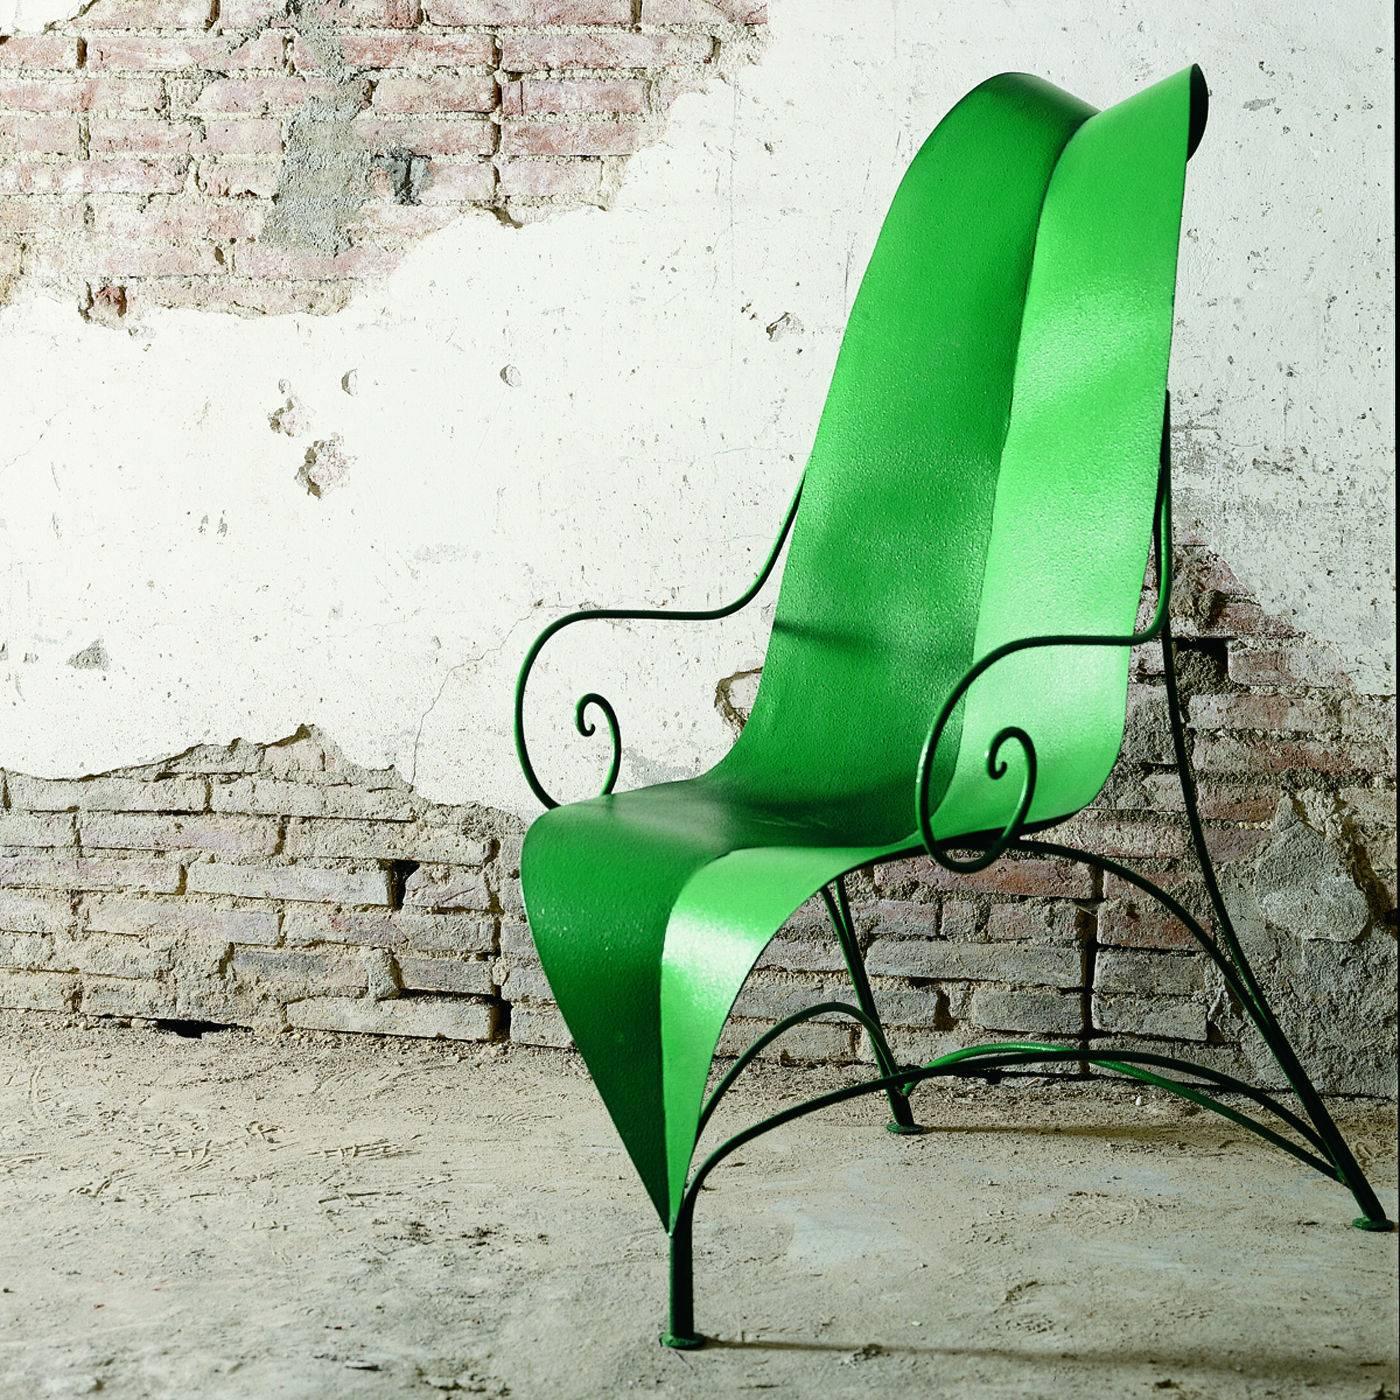 This charming armchair was designed by Fabrizio Corneli and was entirely crafted by master artisans using iron. The striking seat and back are one piece that is shaped and colored to resemble a gigantic leaf in vivid green. The base consists of